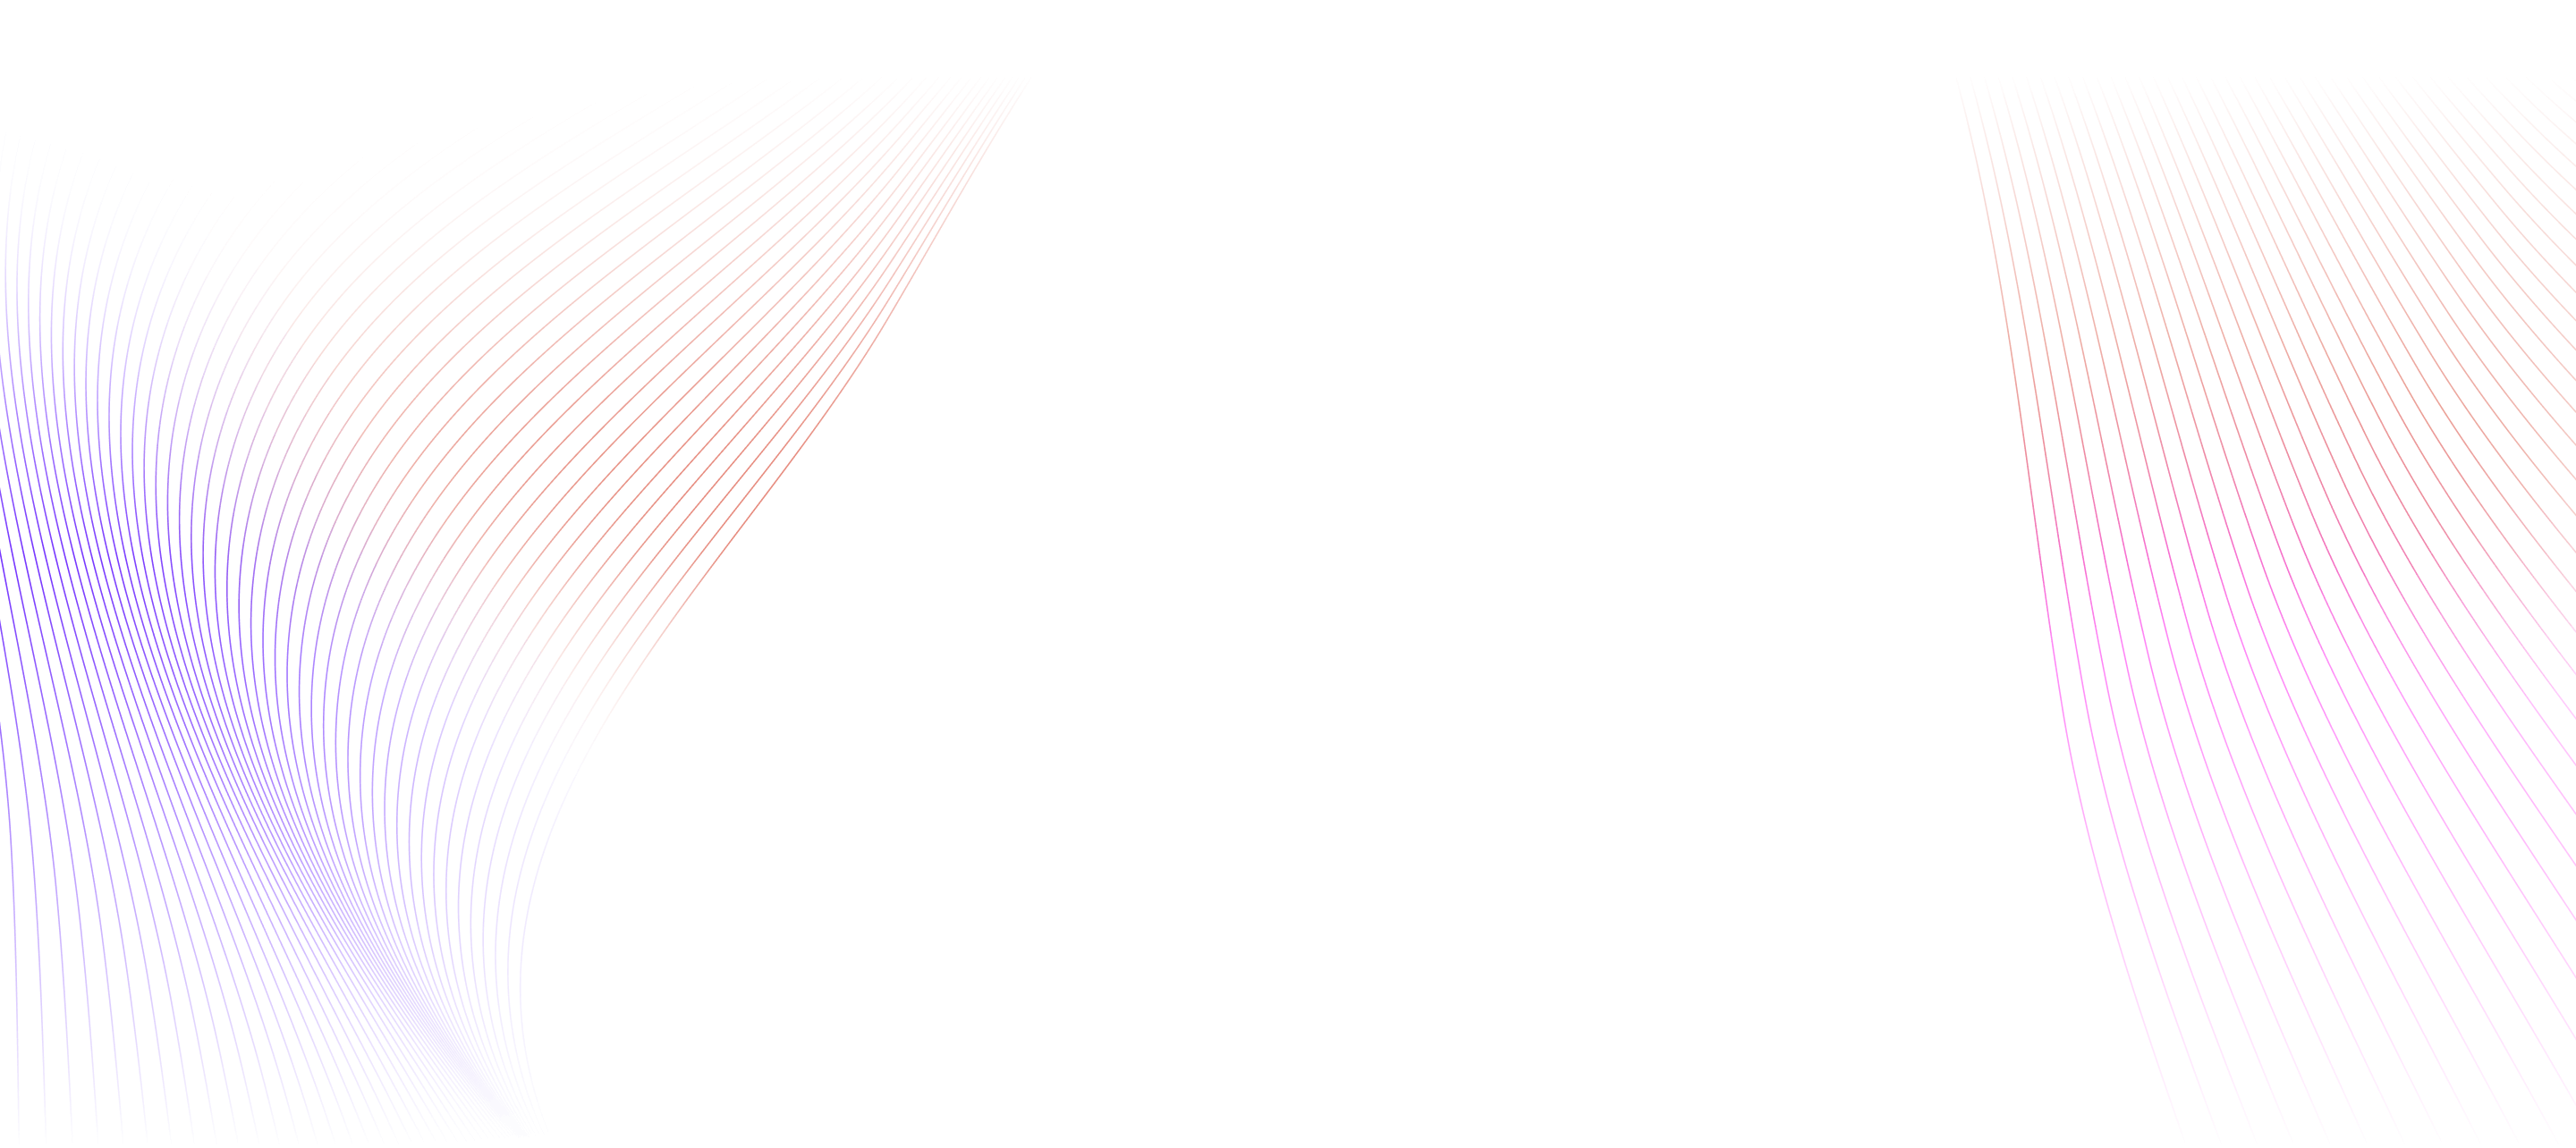 lines-background-image